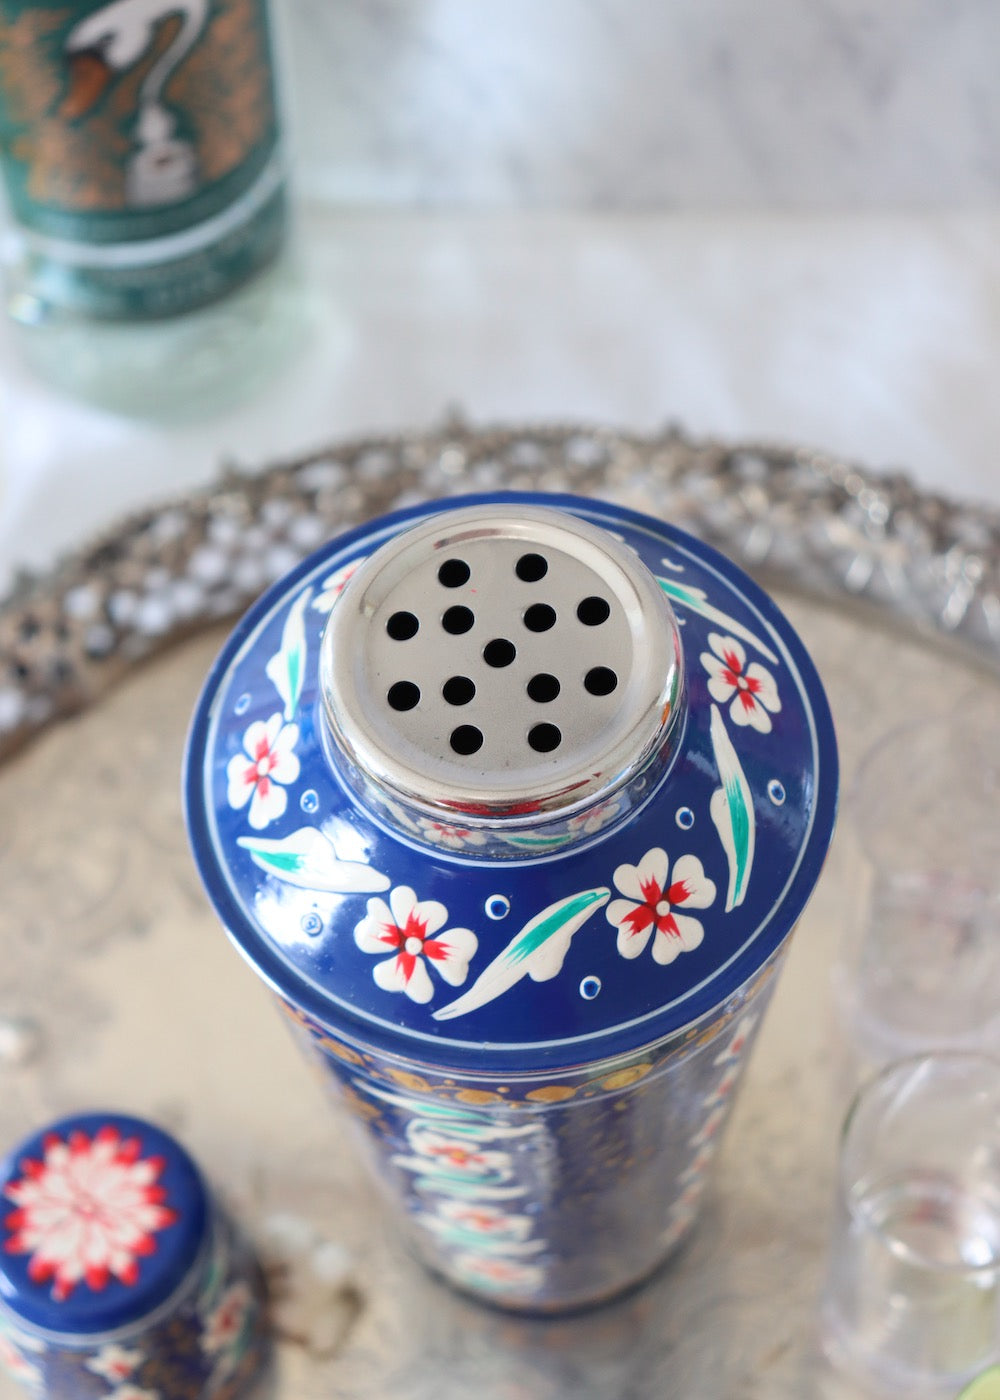 NEW: Cocktail Shaker - Deep Blue with White Flowers